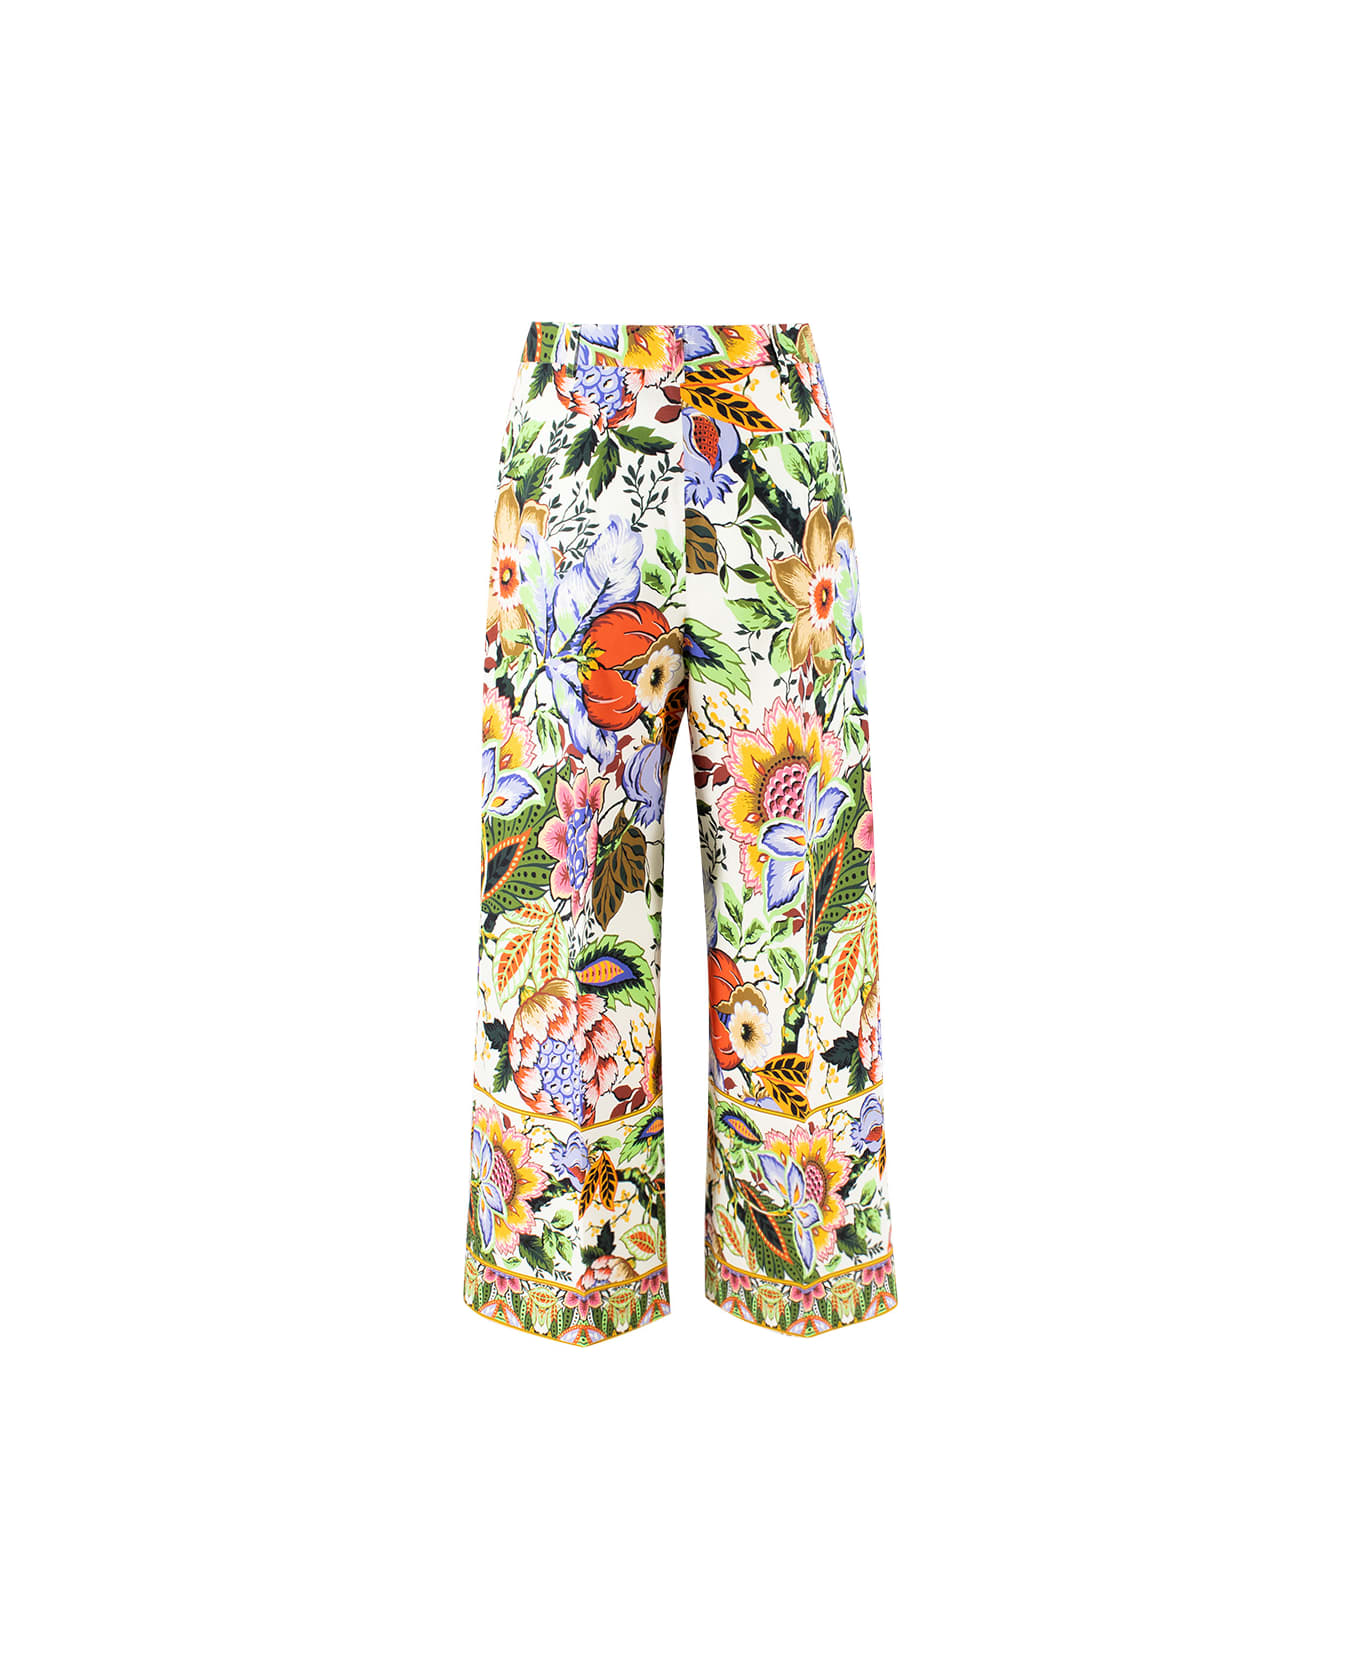 Etro Floral Culotte Pants - PRINT ON WHITE BASE ボトムス